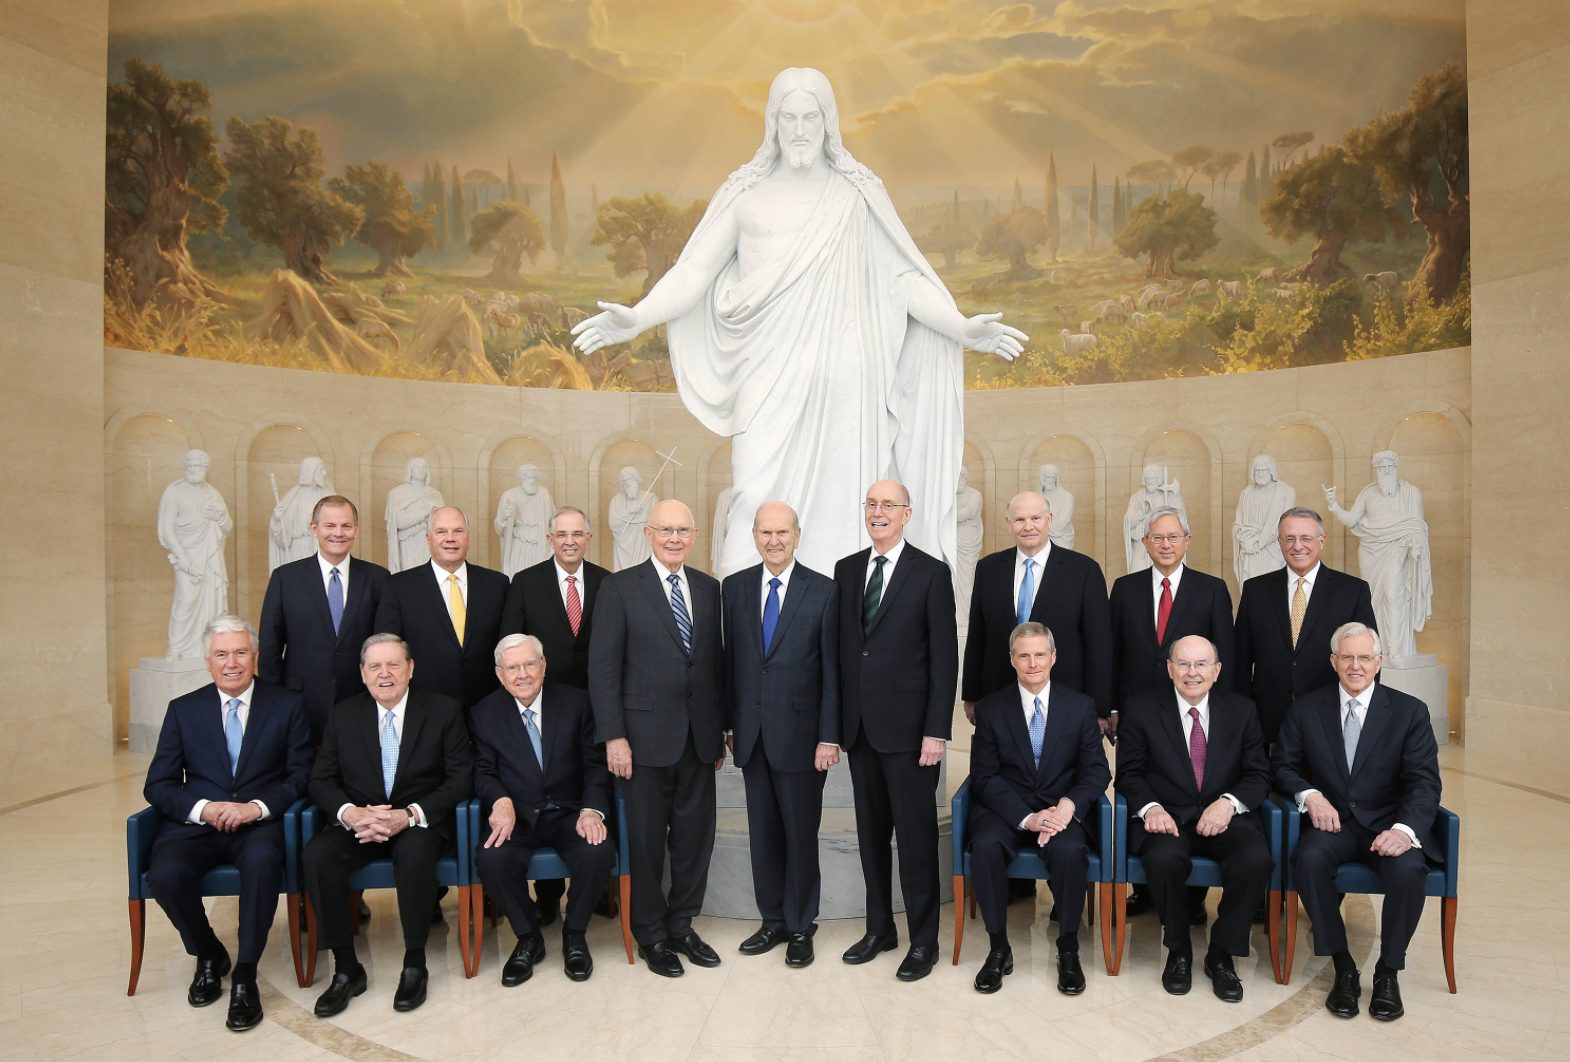 20 years of ‘The Living Christ’: How the First Presidency and Quorum of